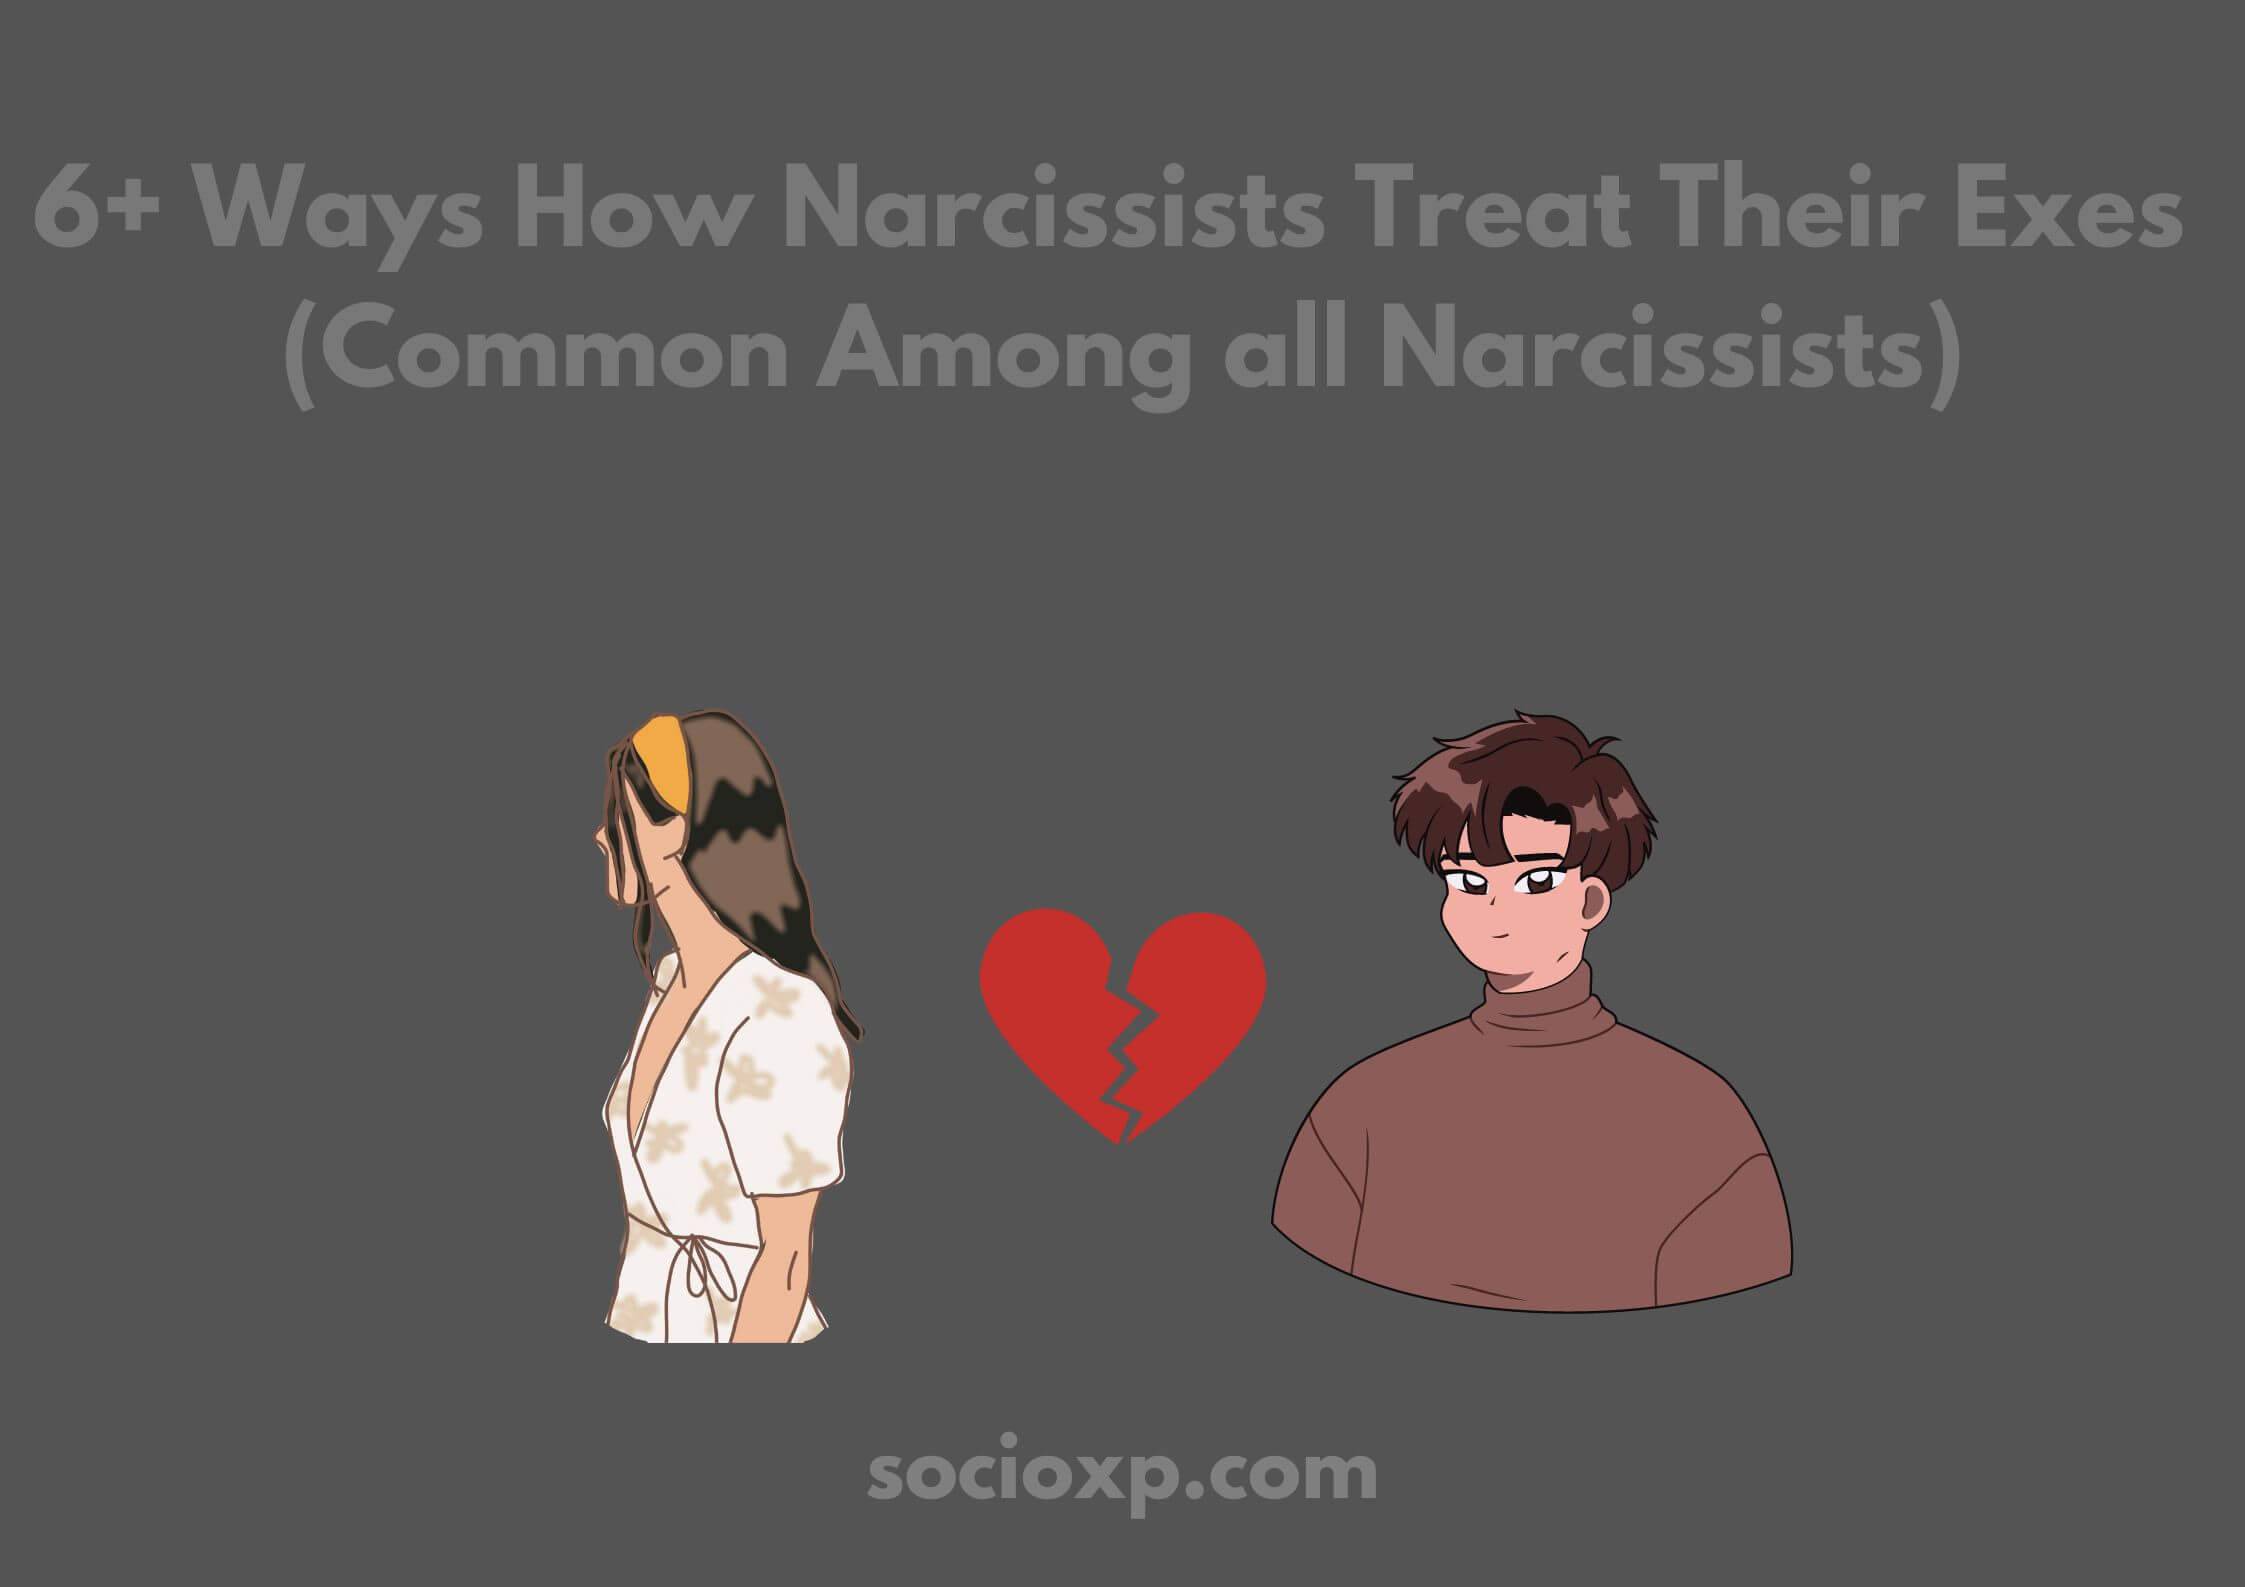 6+ Ways How Narcissists Treat Their Exes (Common Among all Narcissists)